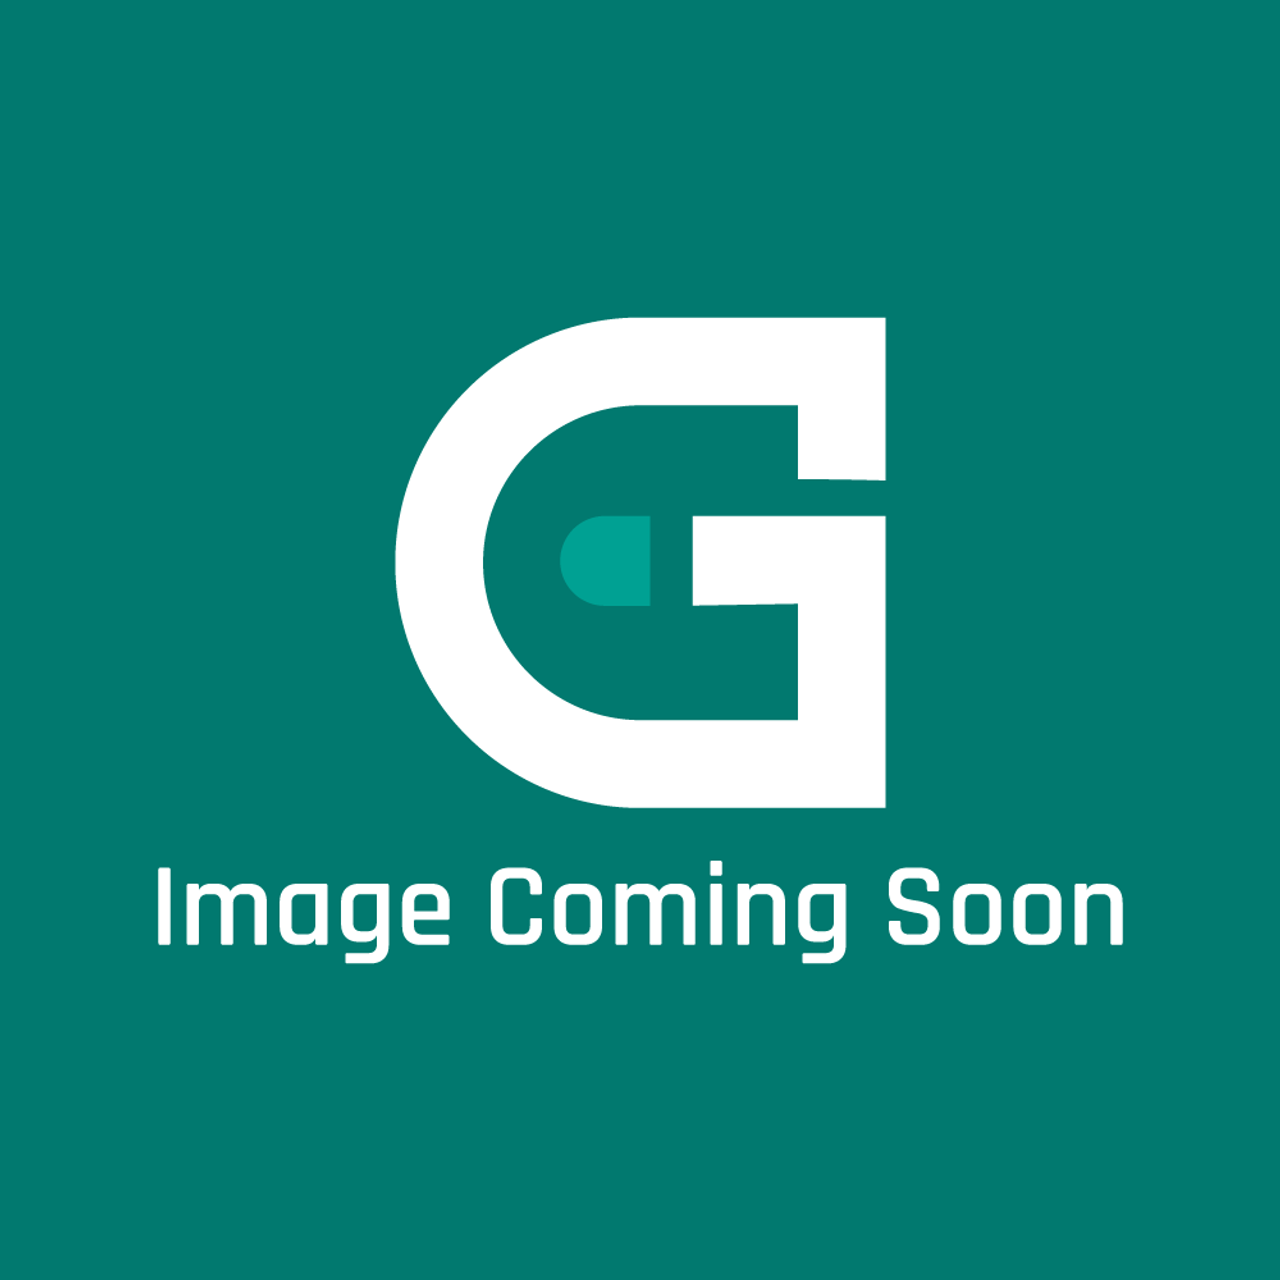 LG 1SDTF040267 - Screw,Taptite - Image Coming Soon!